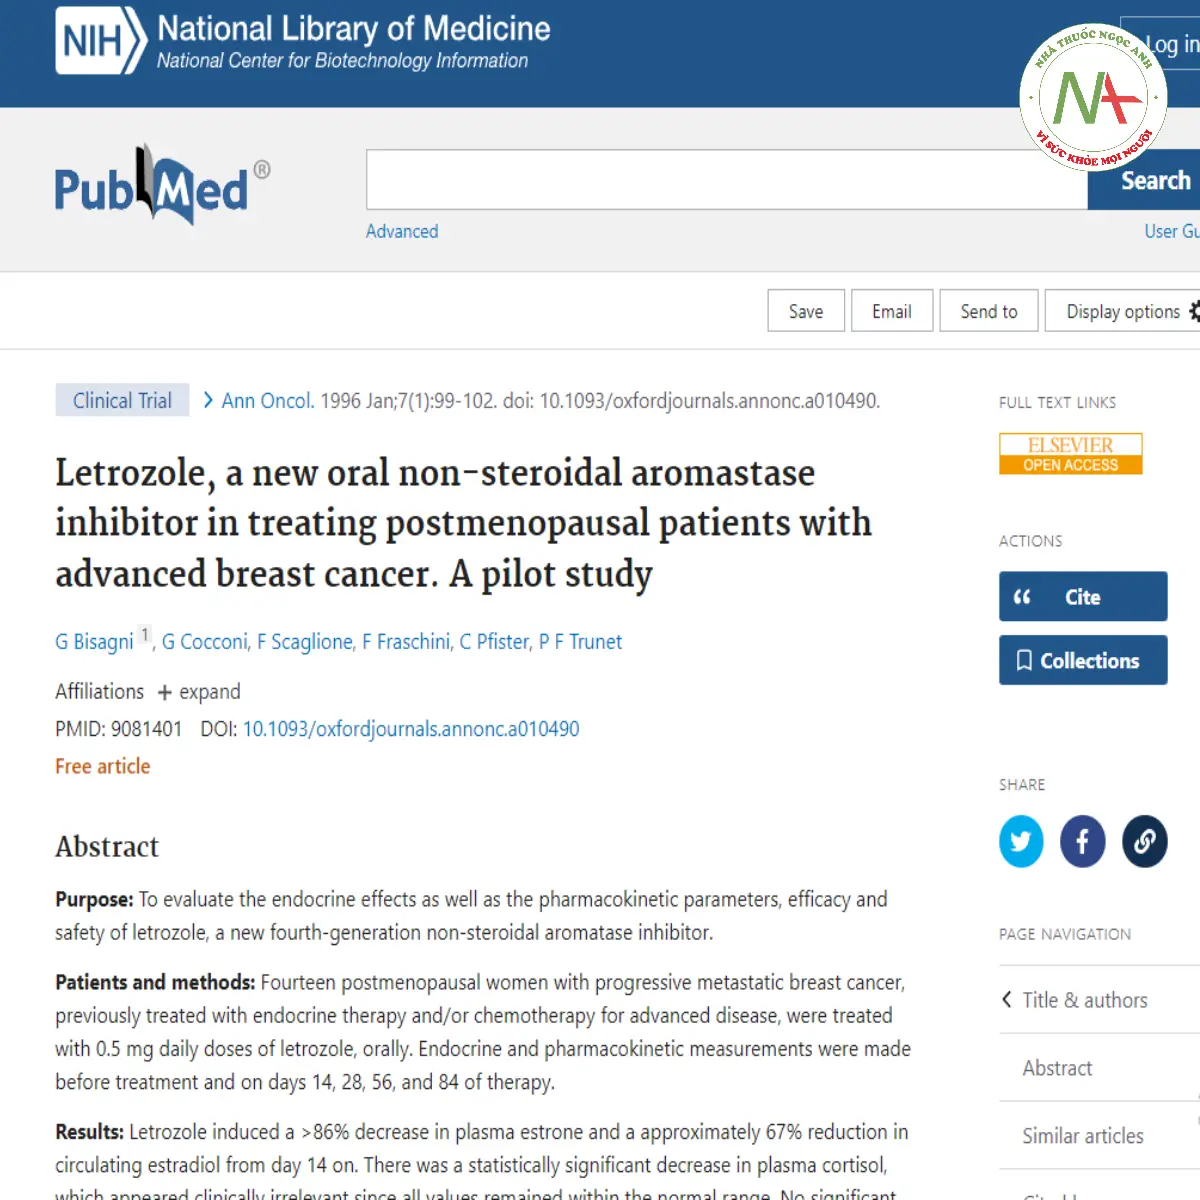 Letrozole, a new oral non-steroidal aromastase inhibitor in treating postmenopausal patients with advanced breast cancer. A pilot study